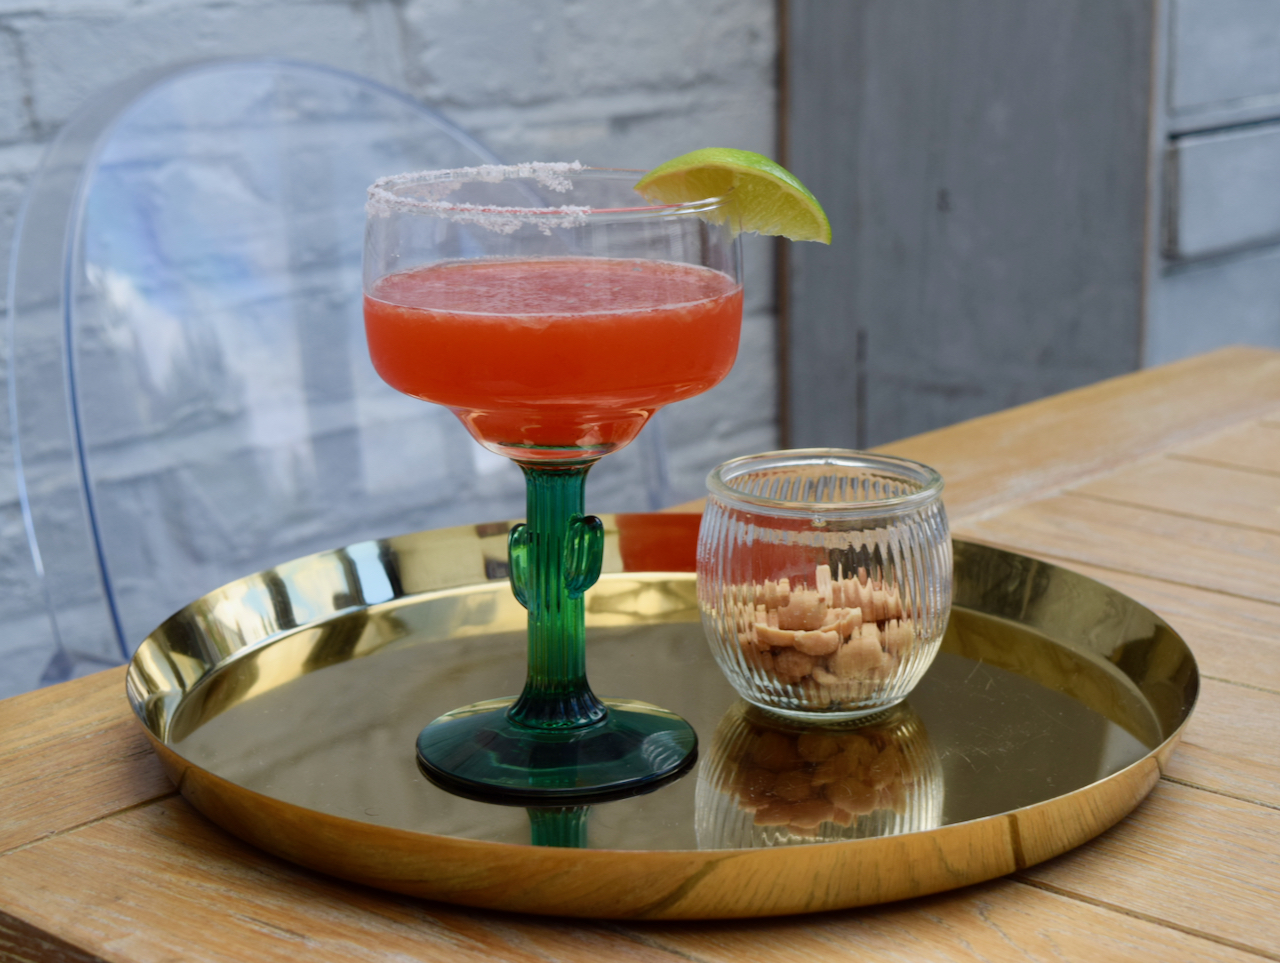 Fresh Strawberry Margarita recipe from Lucy Loves Food Blog